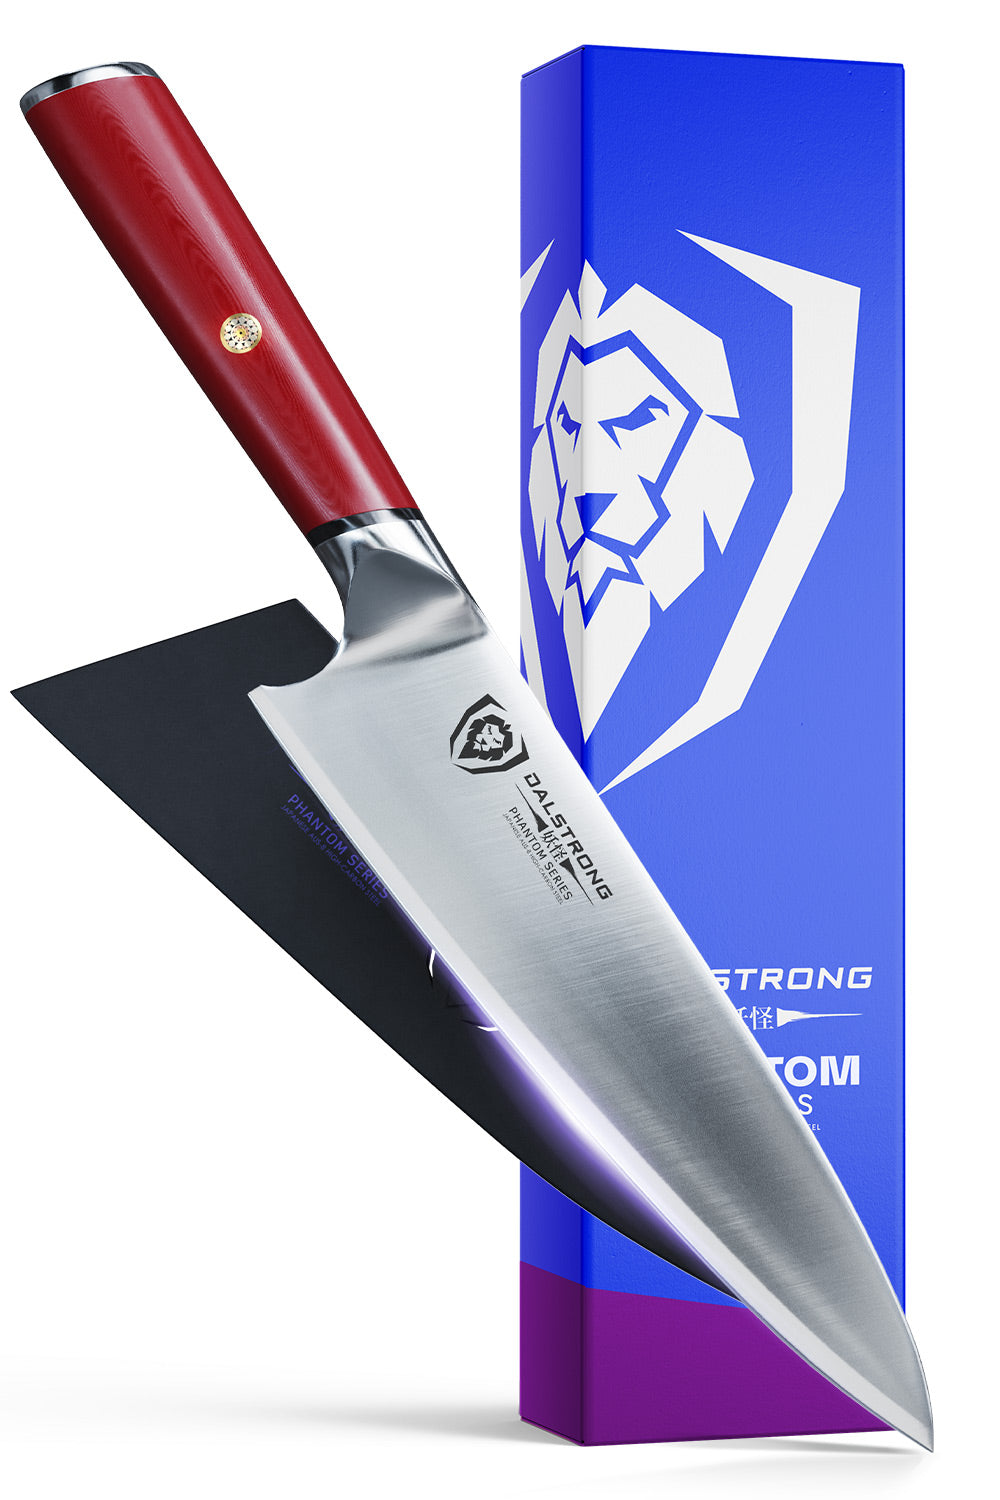 Dalstrong phantom series 8 inch chef knife with red handle in front of it's premium packaging.